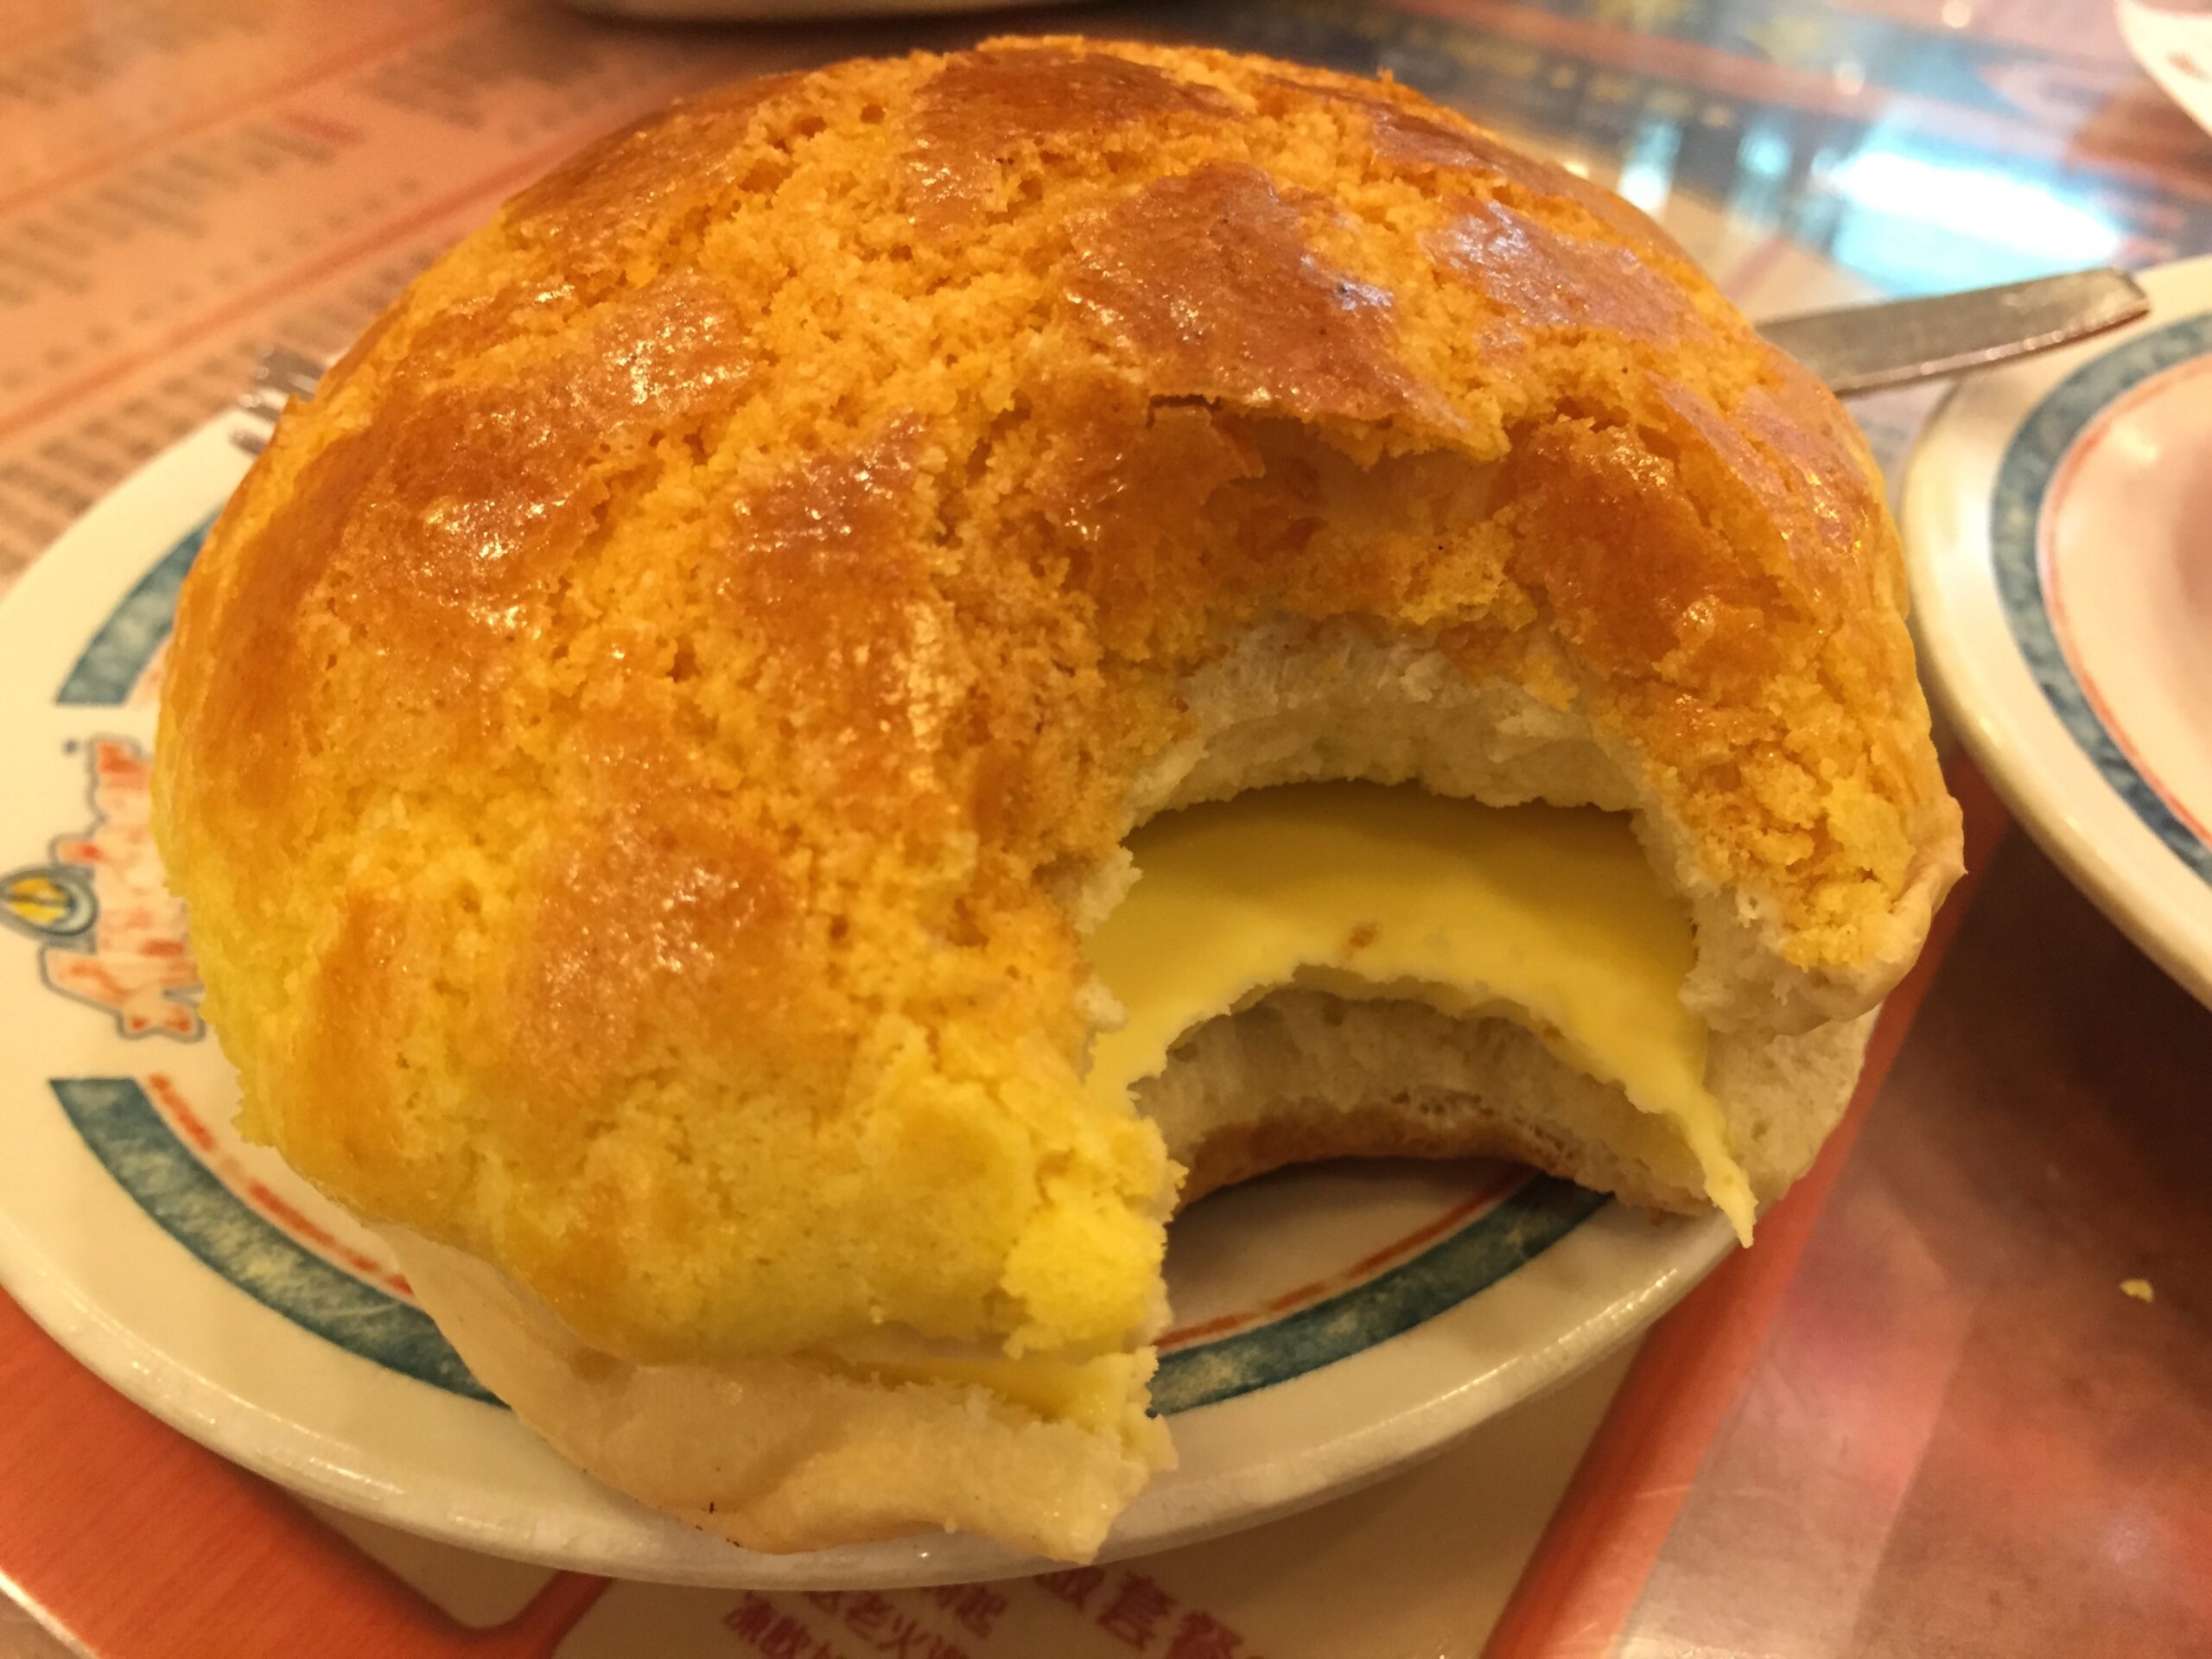 Kam Wah, a traditional Hong Kong cafe, serves an excellent traditional pineapple bun with butter.